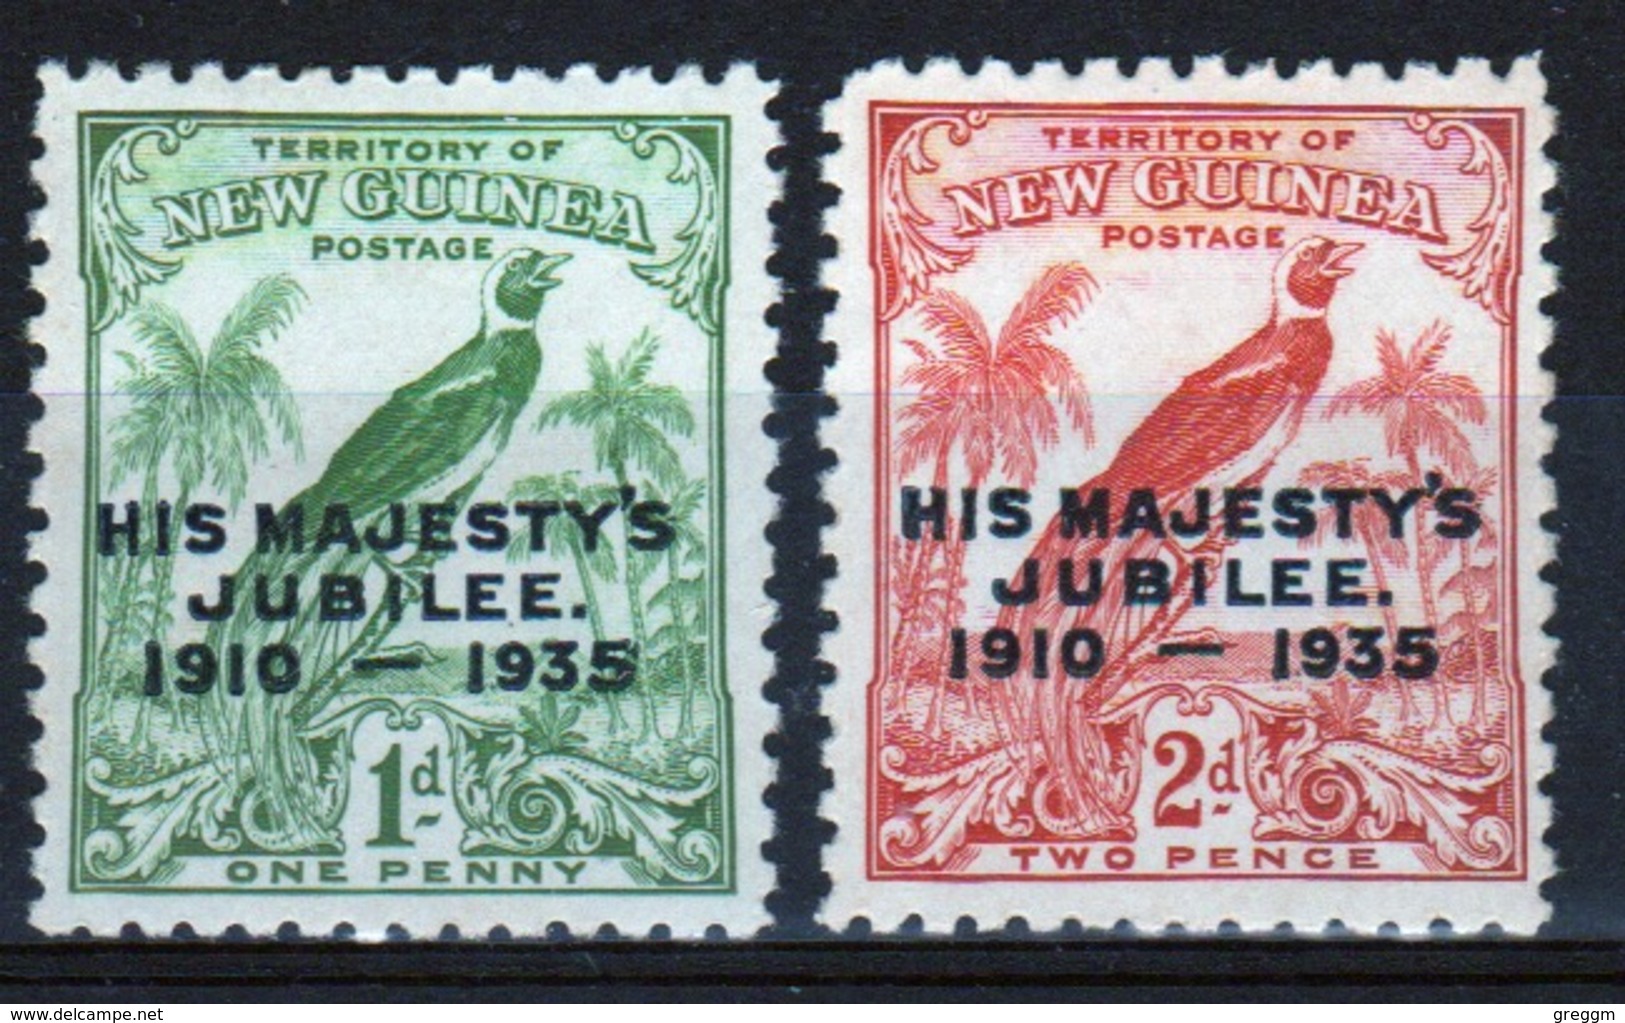 Territory Of New Guinea Set Of Stamps To Celebrate 1935 Silver Jubilee. - Papua New Guinea